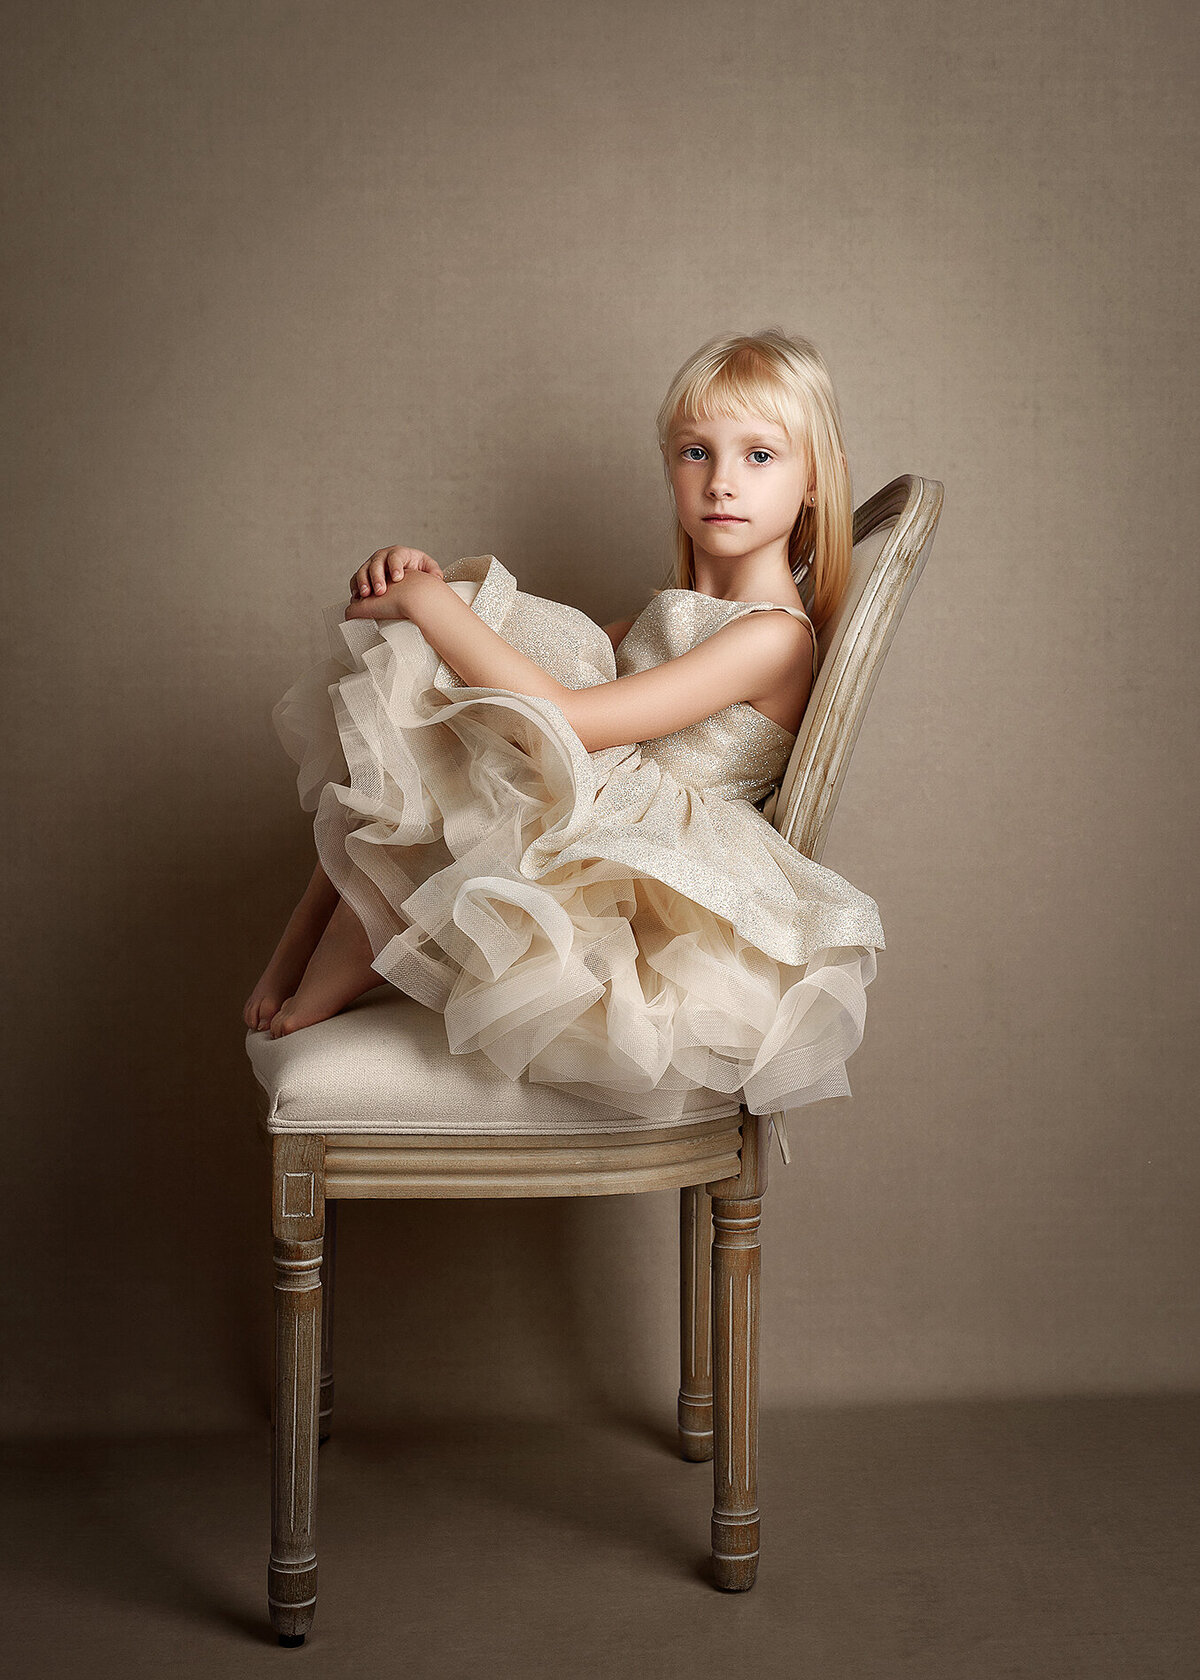 5 year old girl posed sitting on a chair Oswego